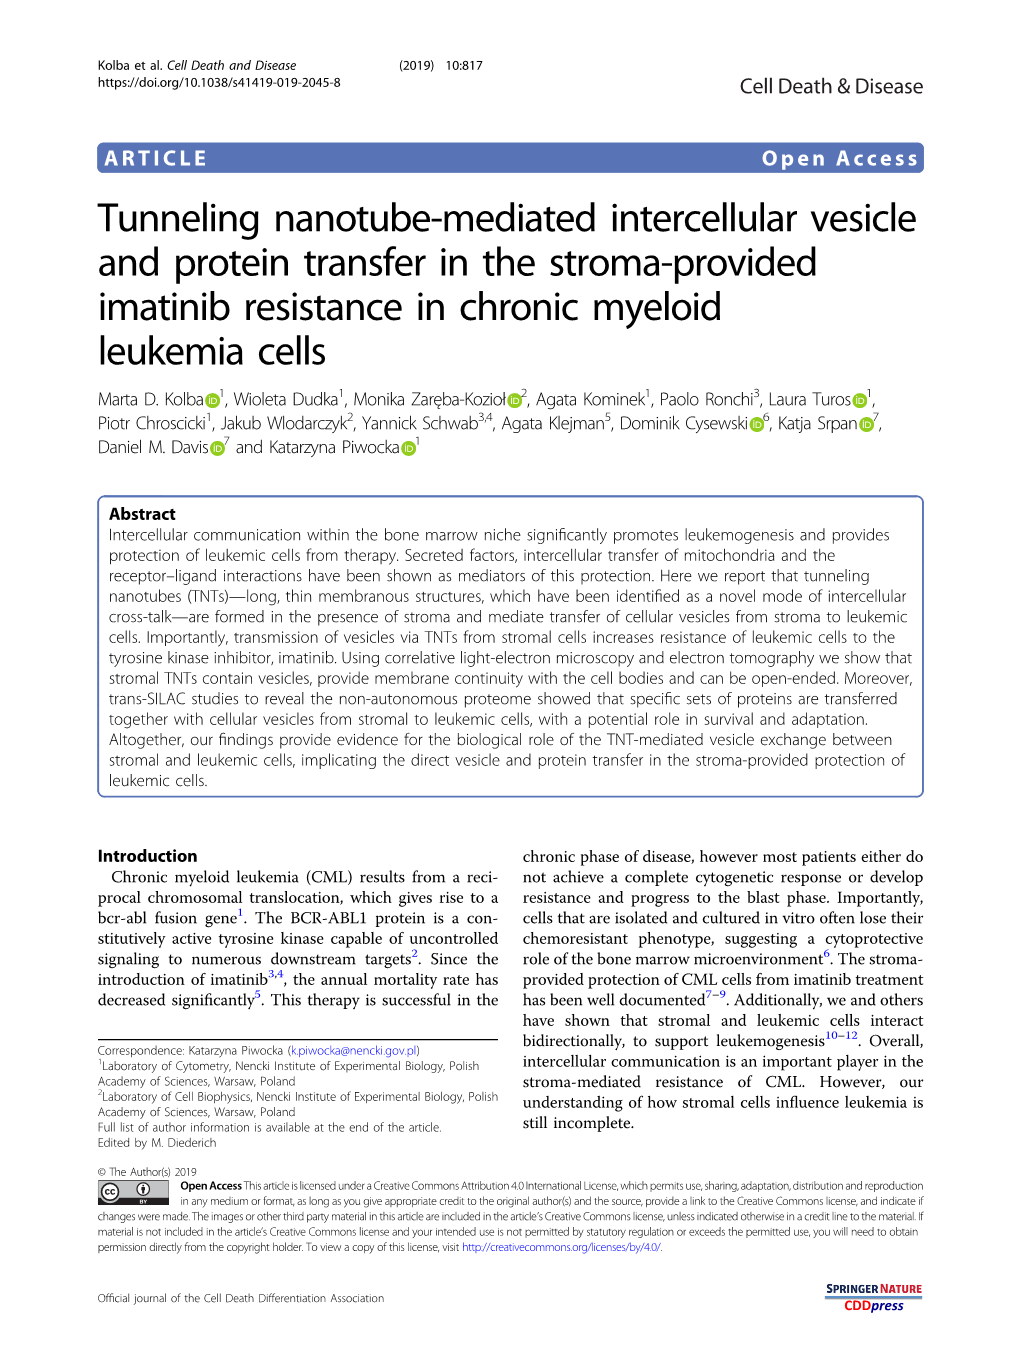 Tunneling Nanotube-Mediated Intercellular Vesicle and Protein Transfer in the Stroma-Provided Imatinib Resistance in Chronic Myeloid Leukemia Cells Marta D